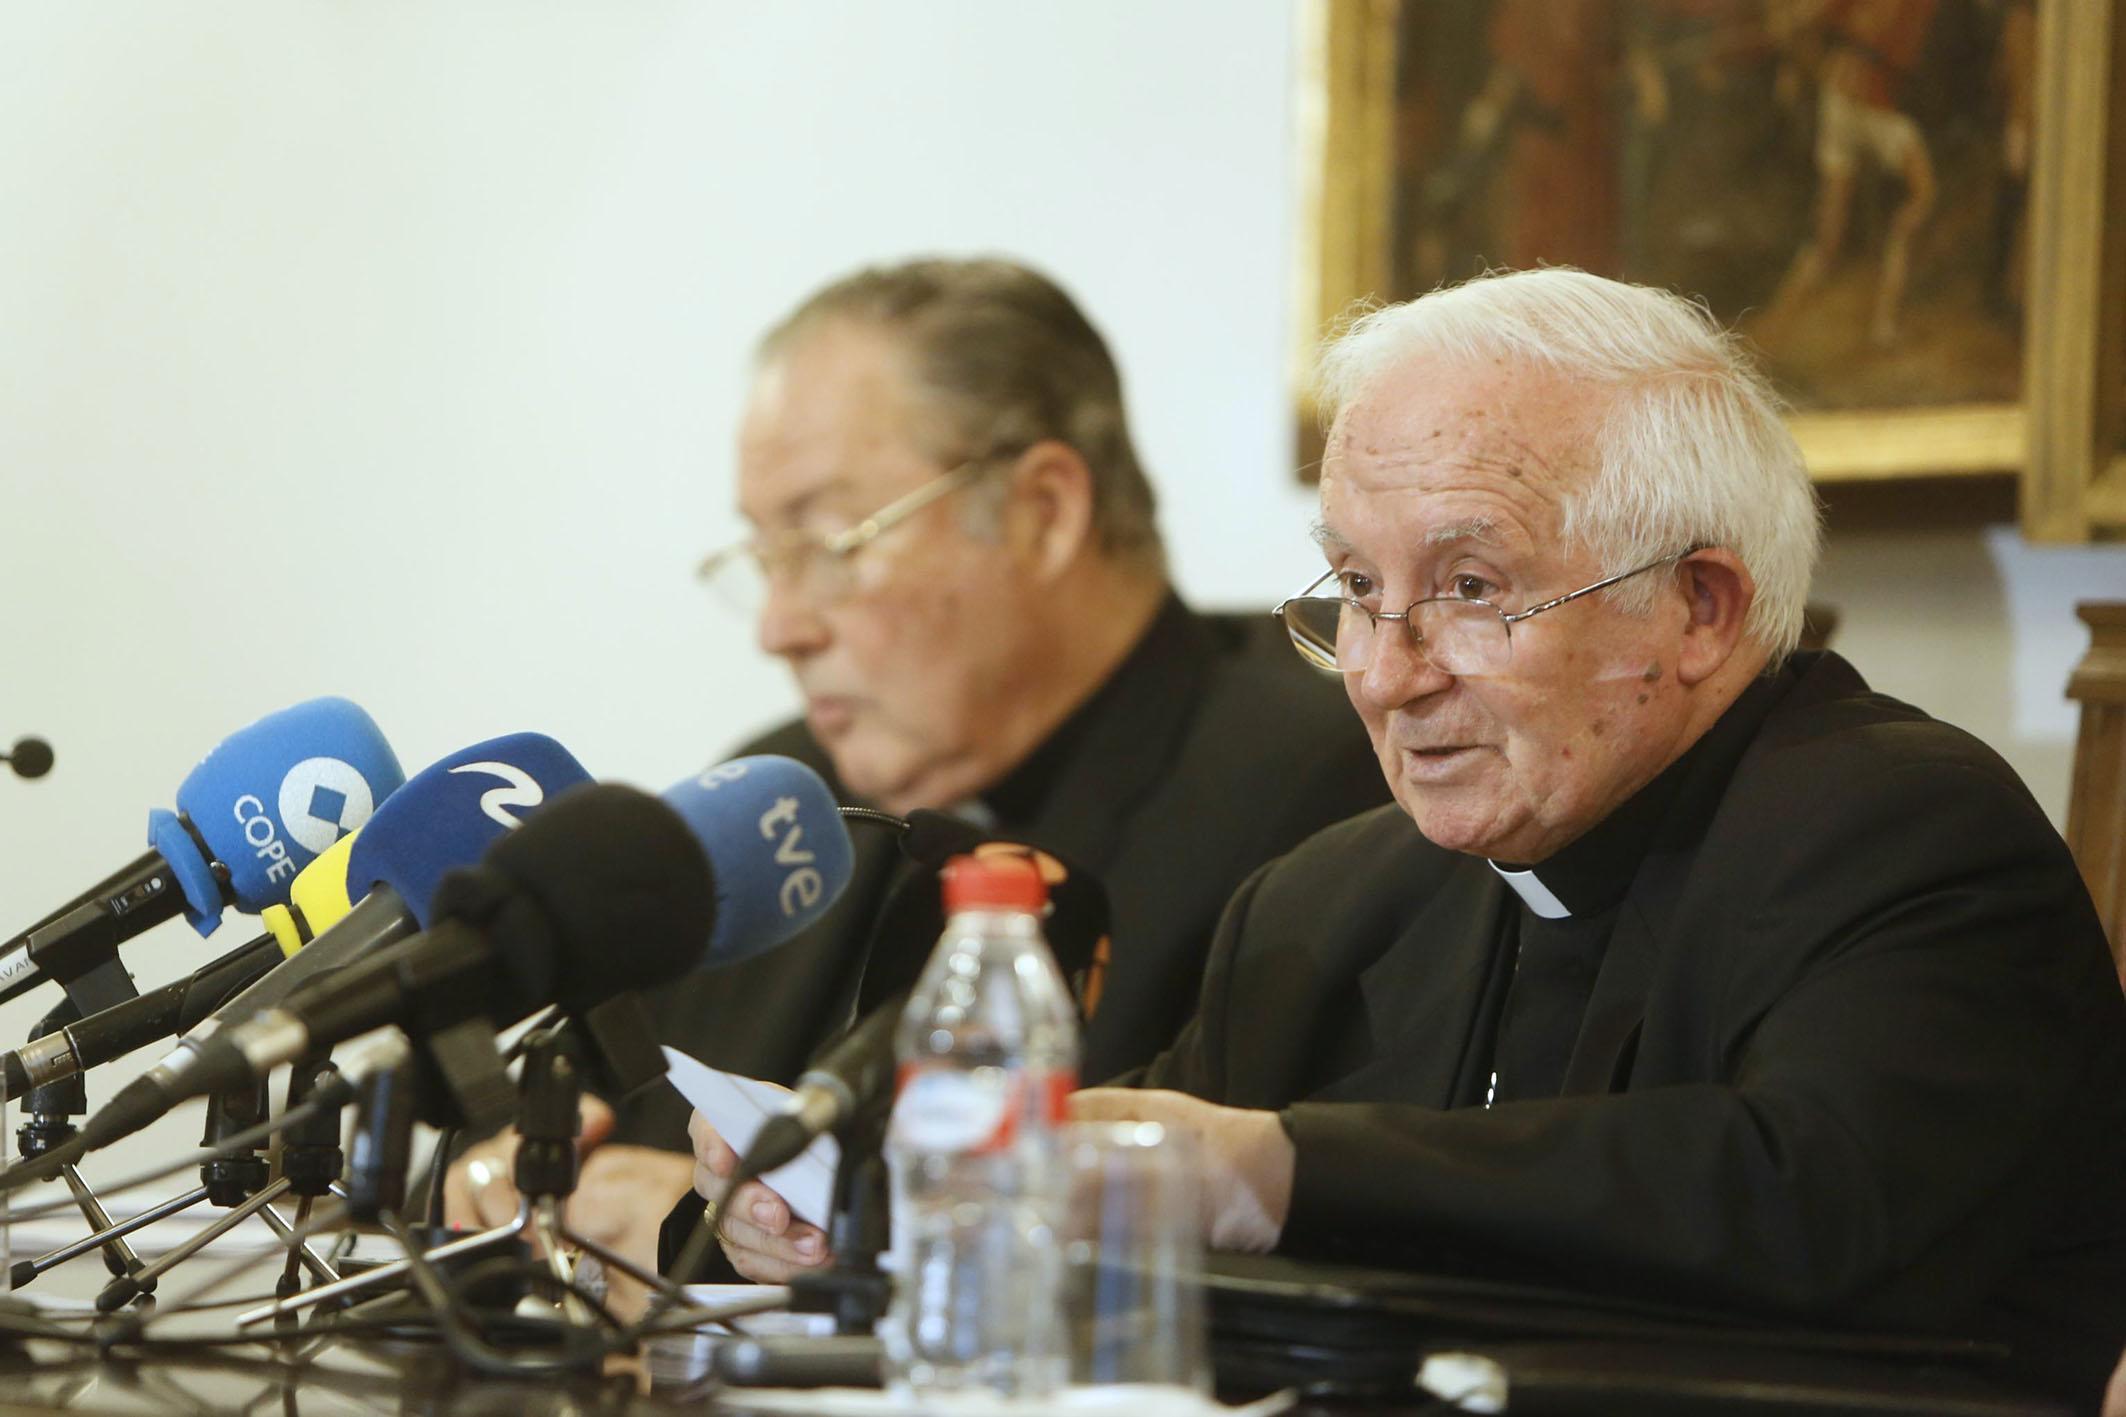 Cardinal Cañizares presents the new encyclical letter